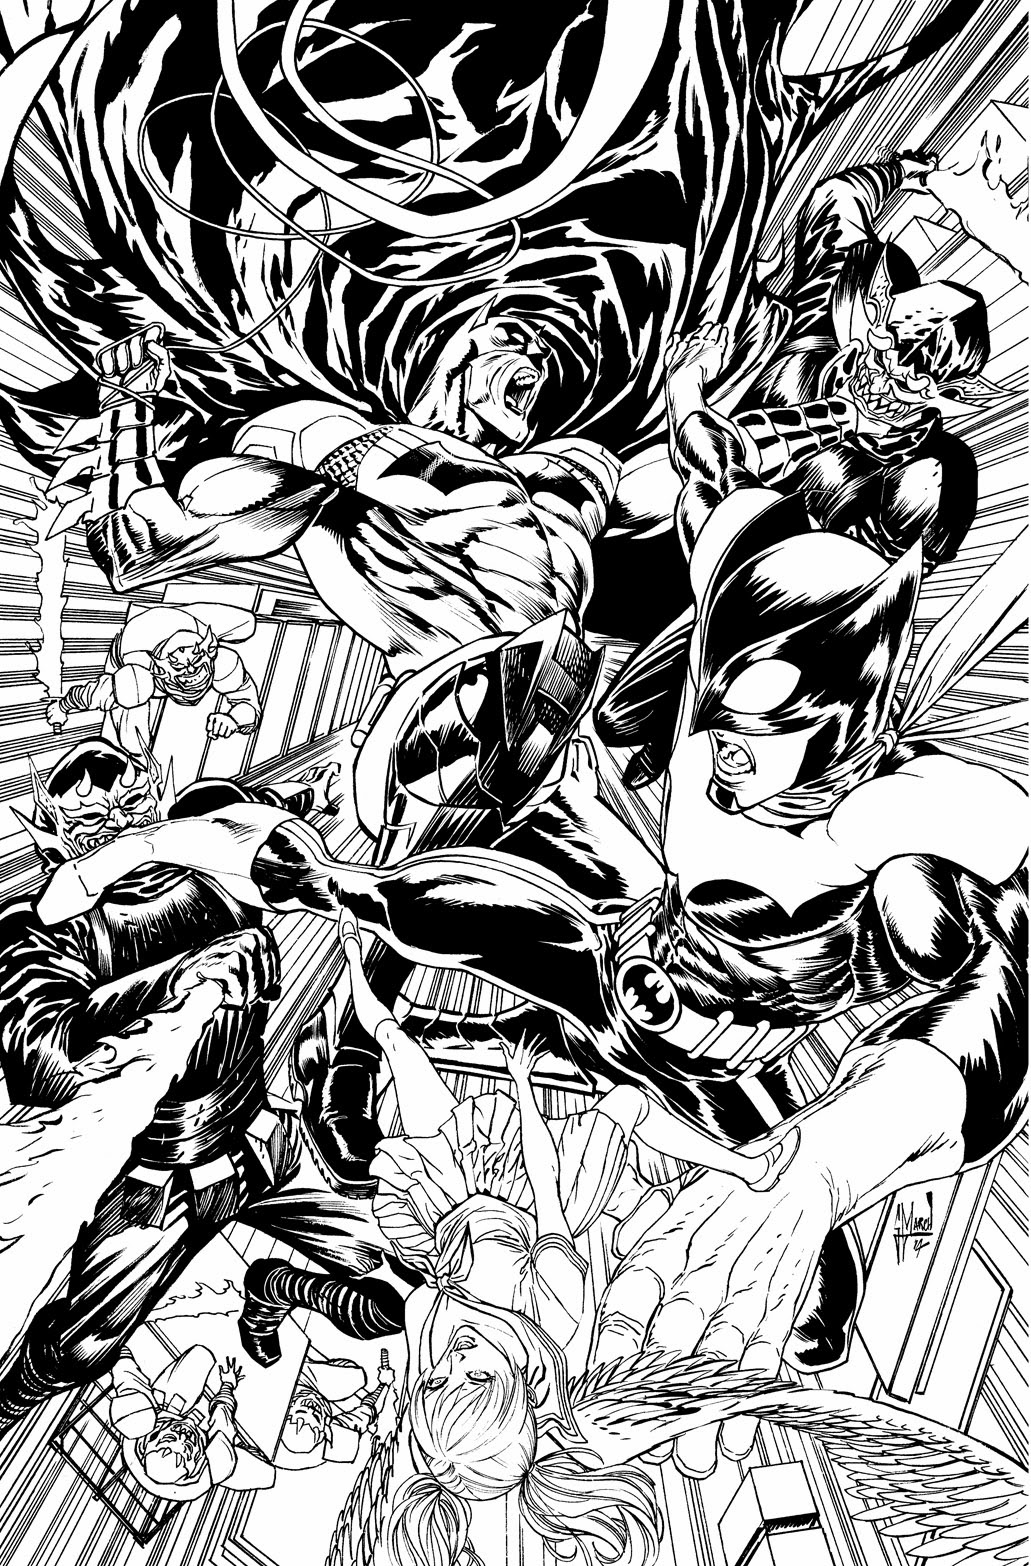 Making of a cover: BATMAN ETERNAL #9 by Guillem March